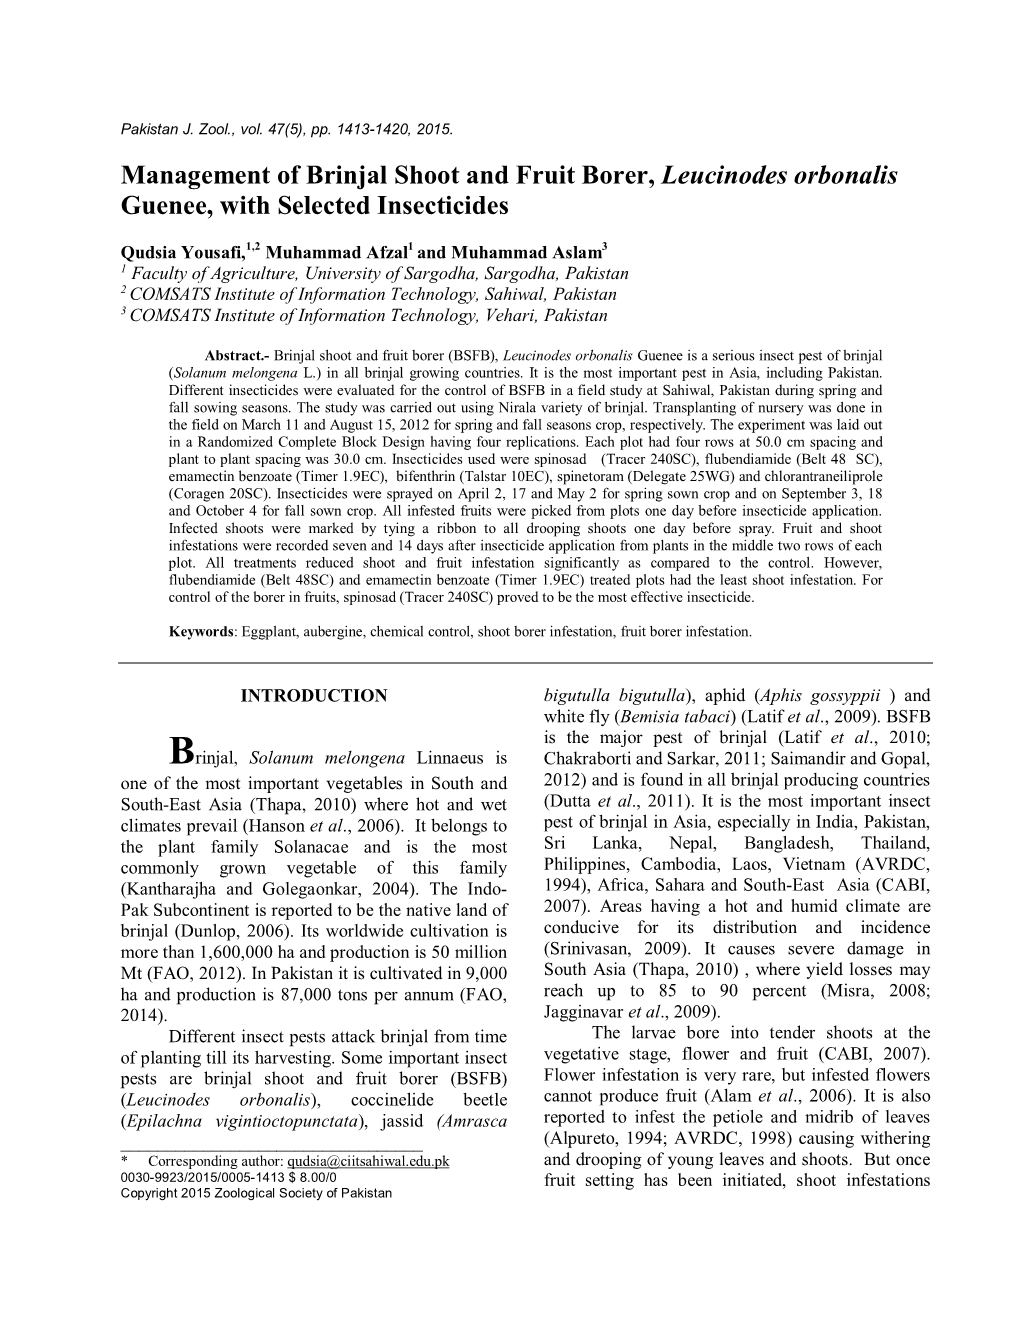 Management of Brinjal Shoot and Fruit Borer, Leucinodes Orbonalis Guenee, with Selected Insecticides